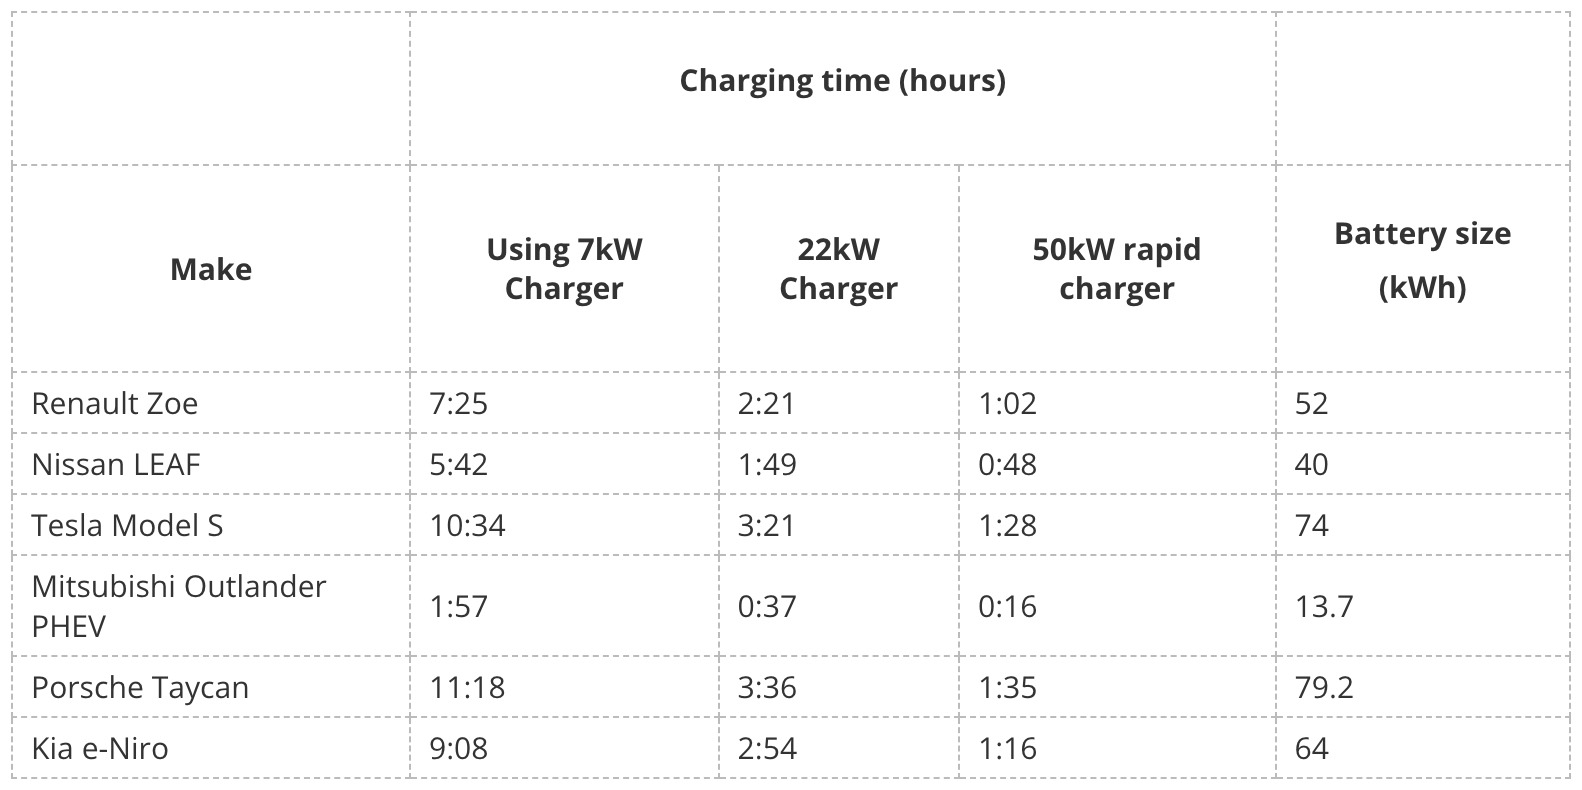 1. How long does a 7kW charge take to charge an EV